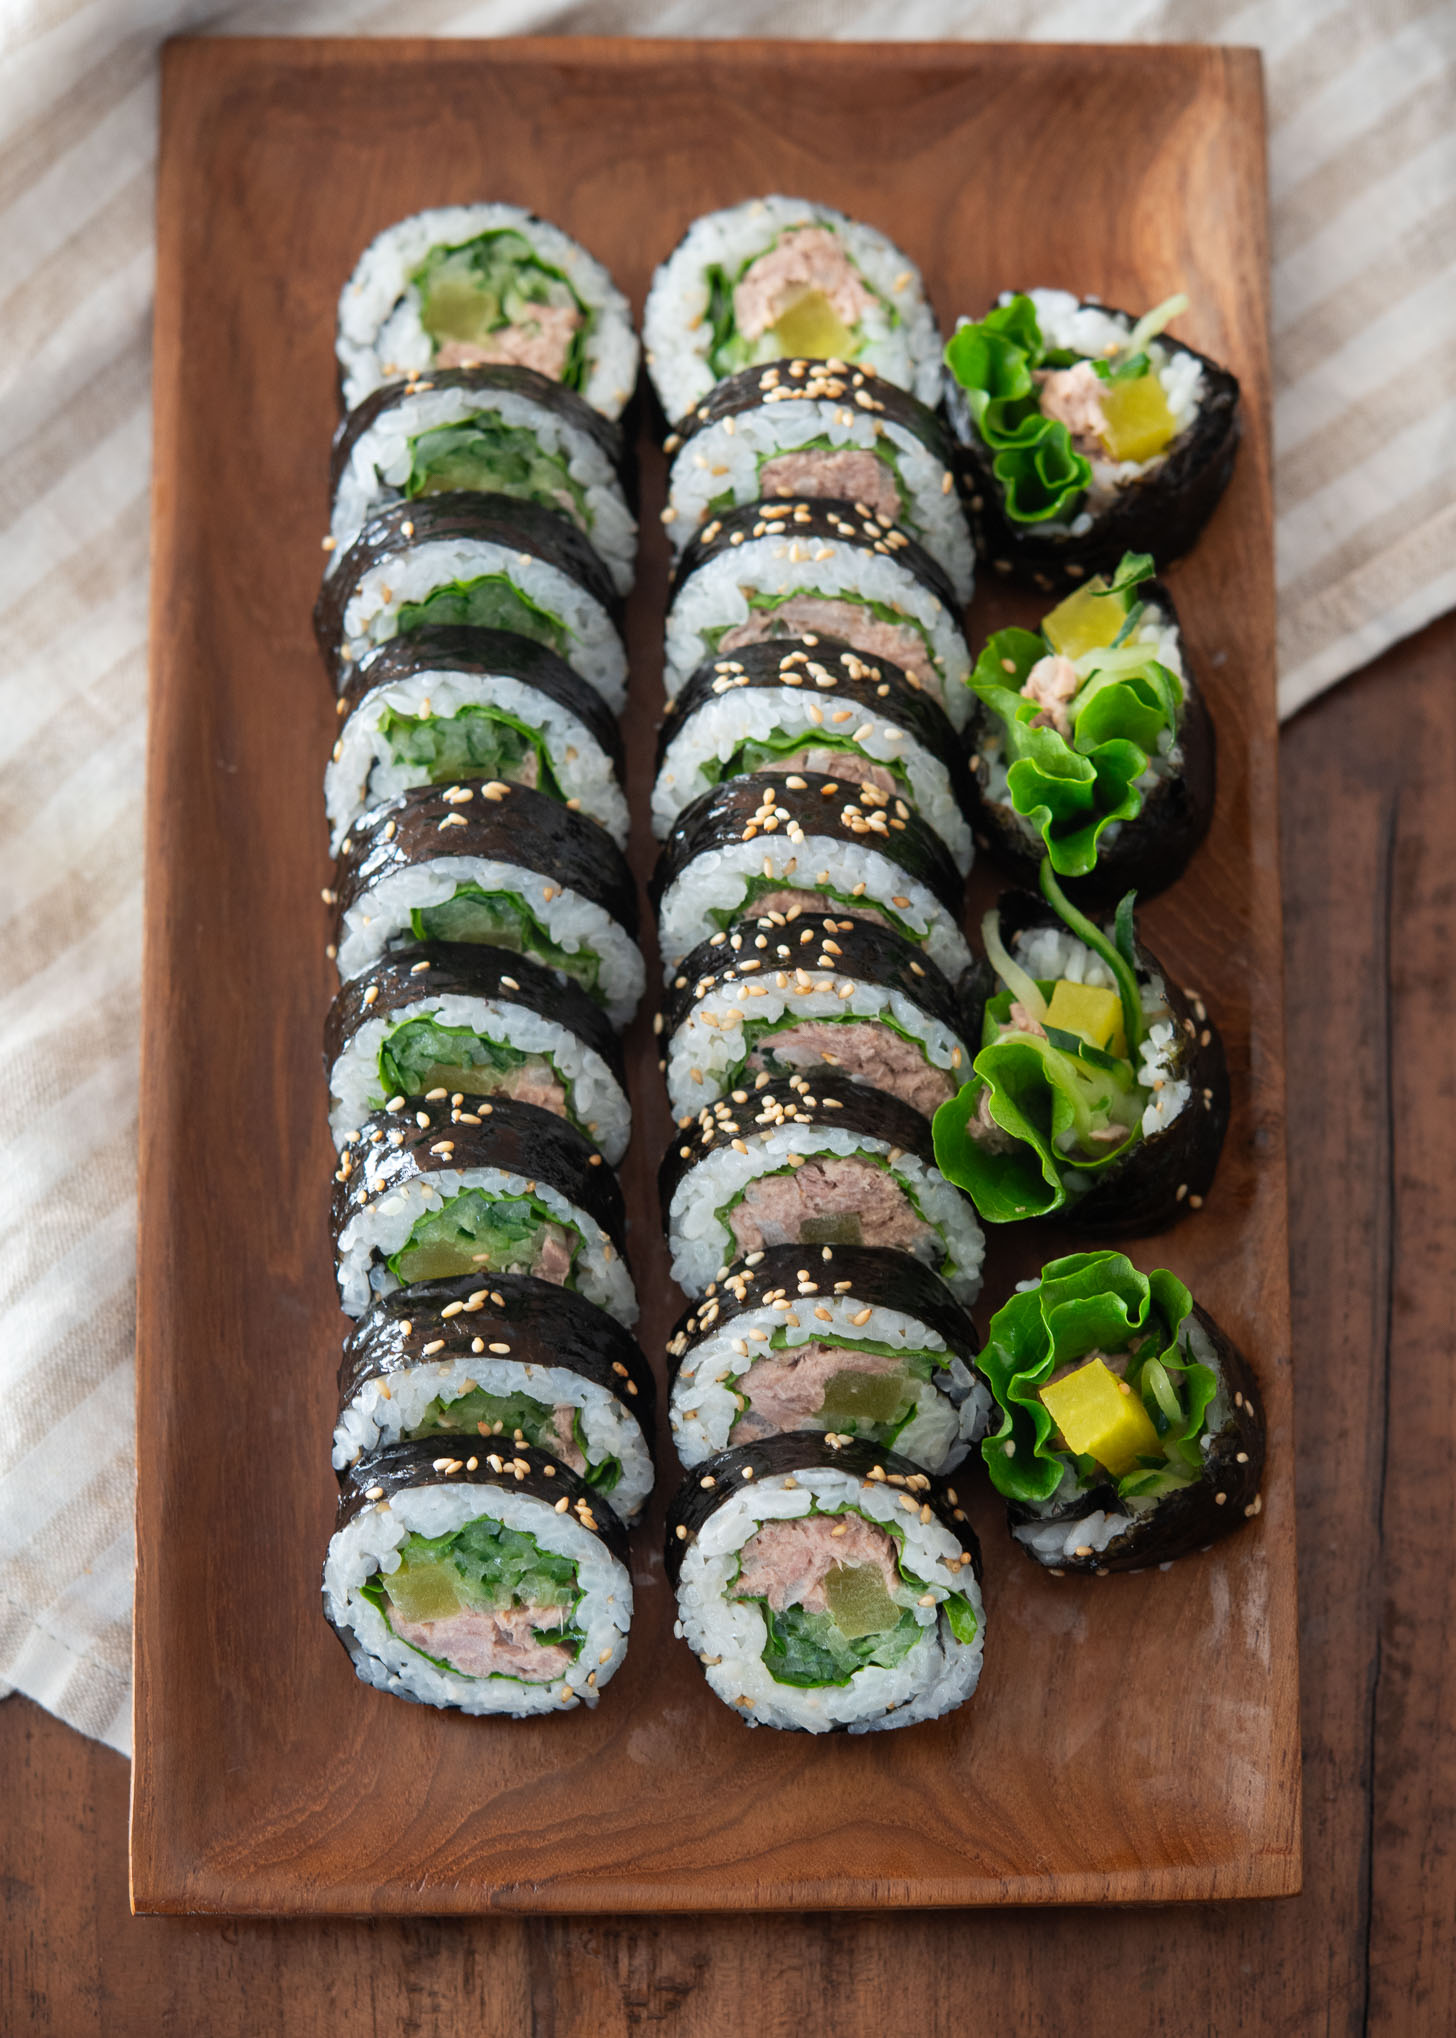 Two rows of sliced cucumber tuna kimbap arranged on a platter.